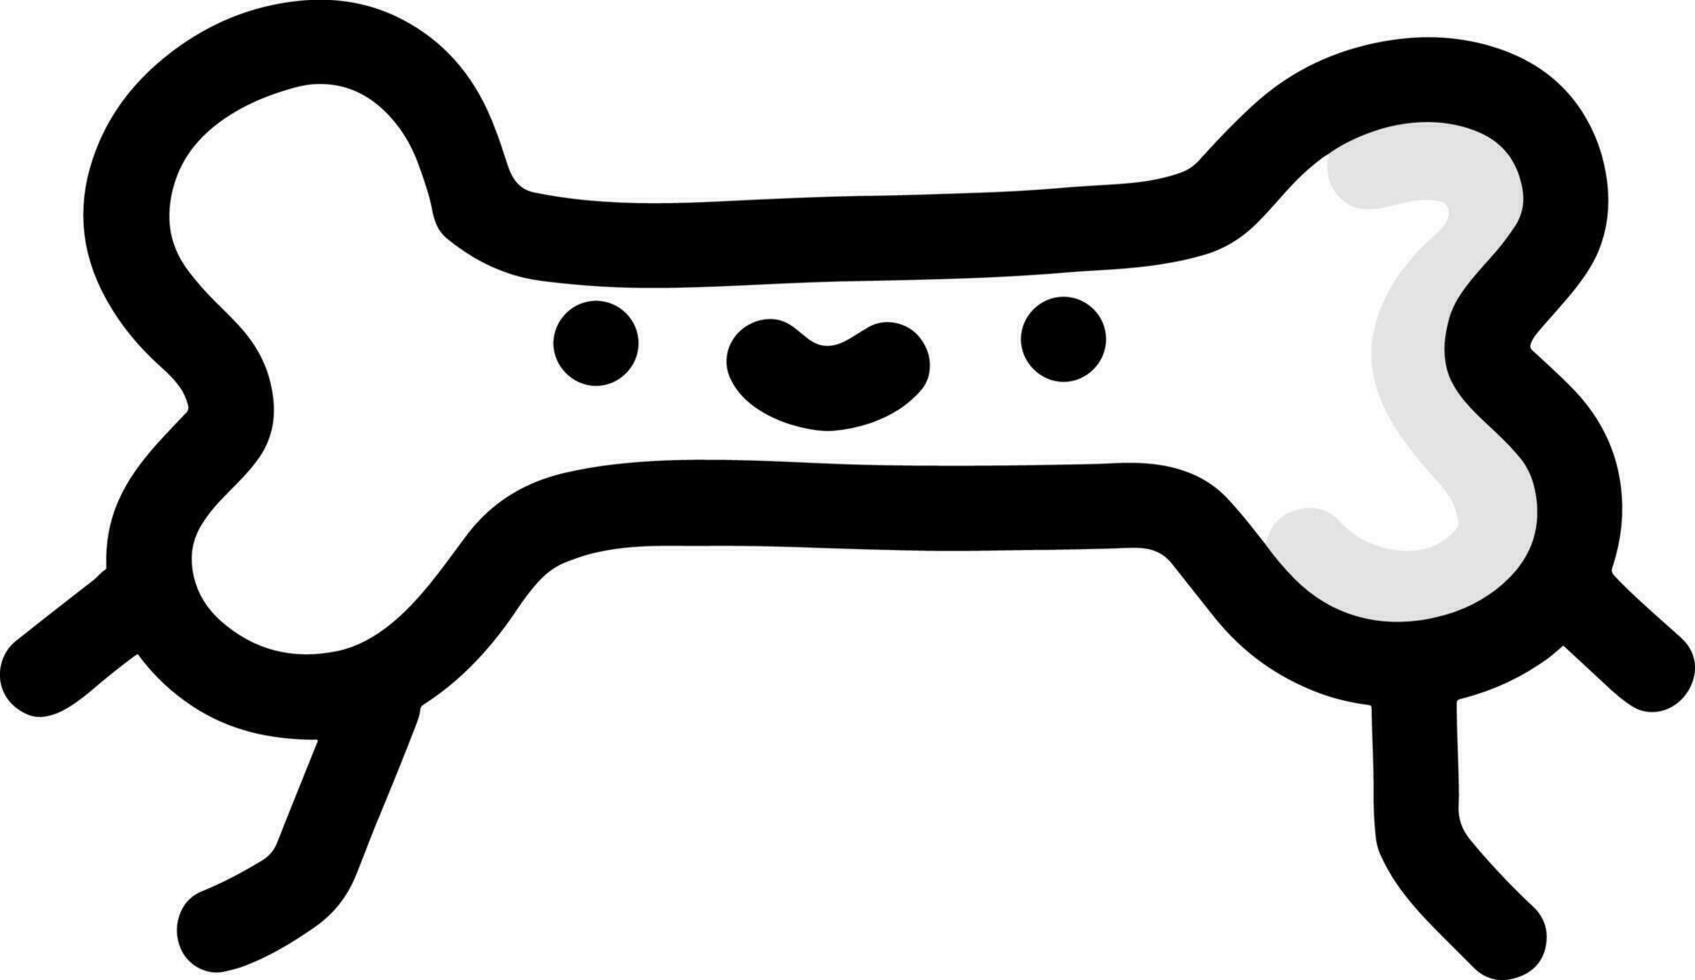 Illustrated friendly-looking bone with arms, legs and a face vector